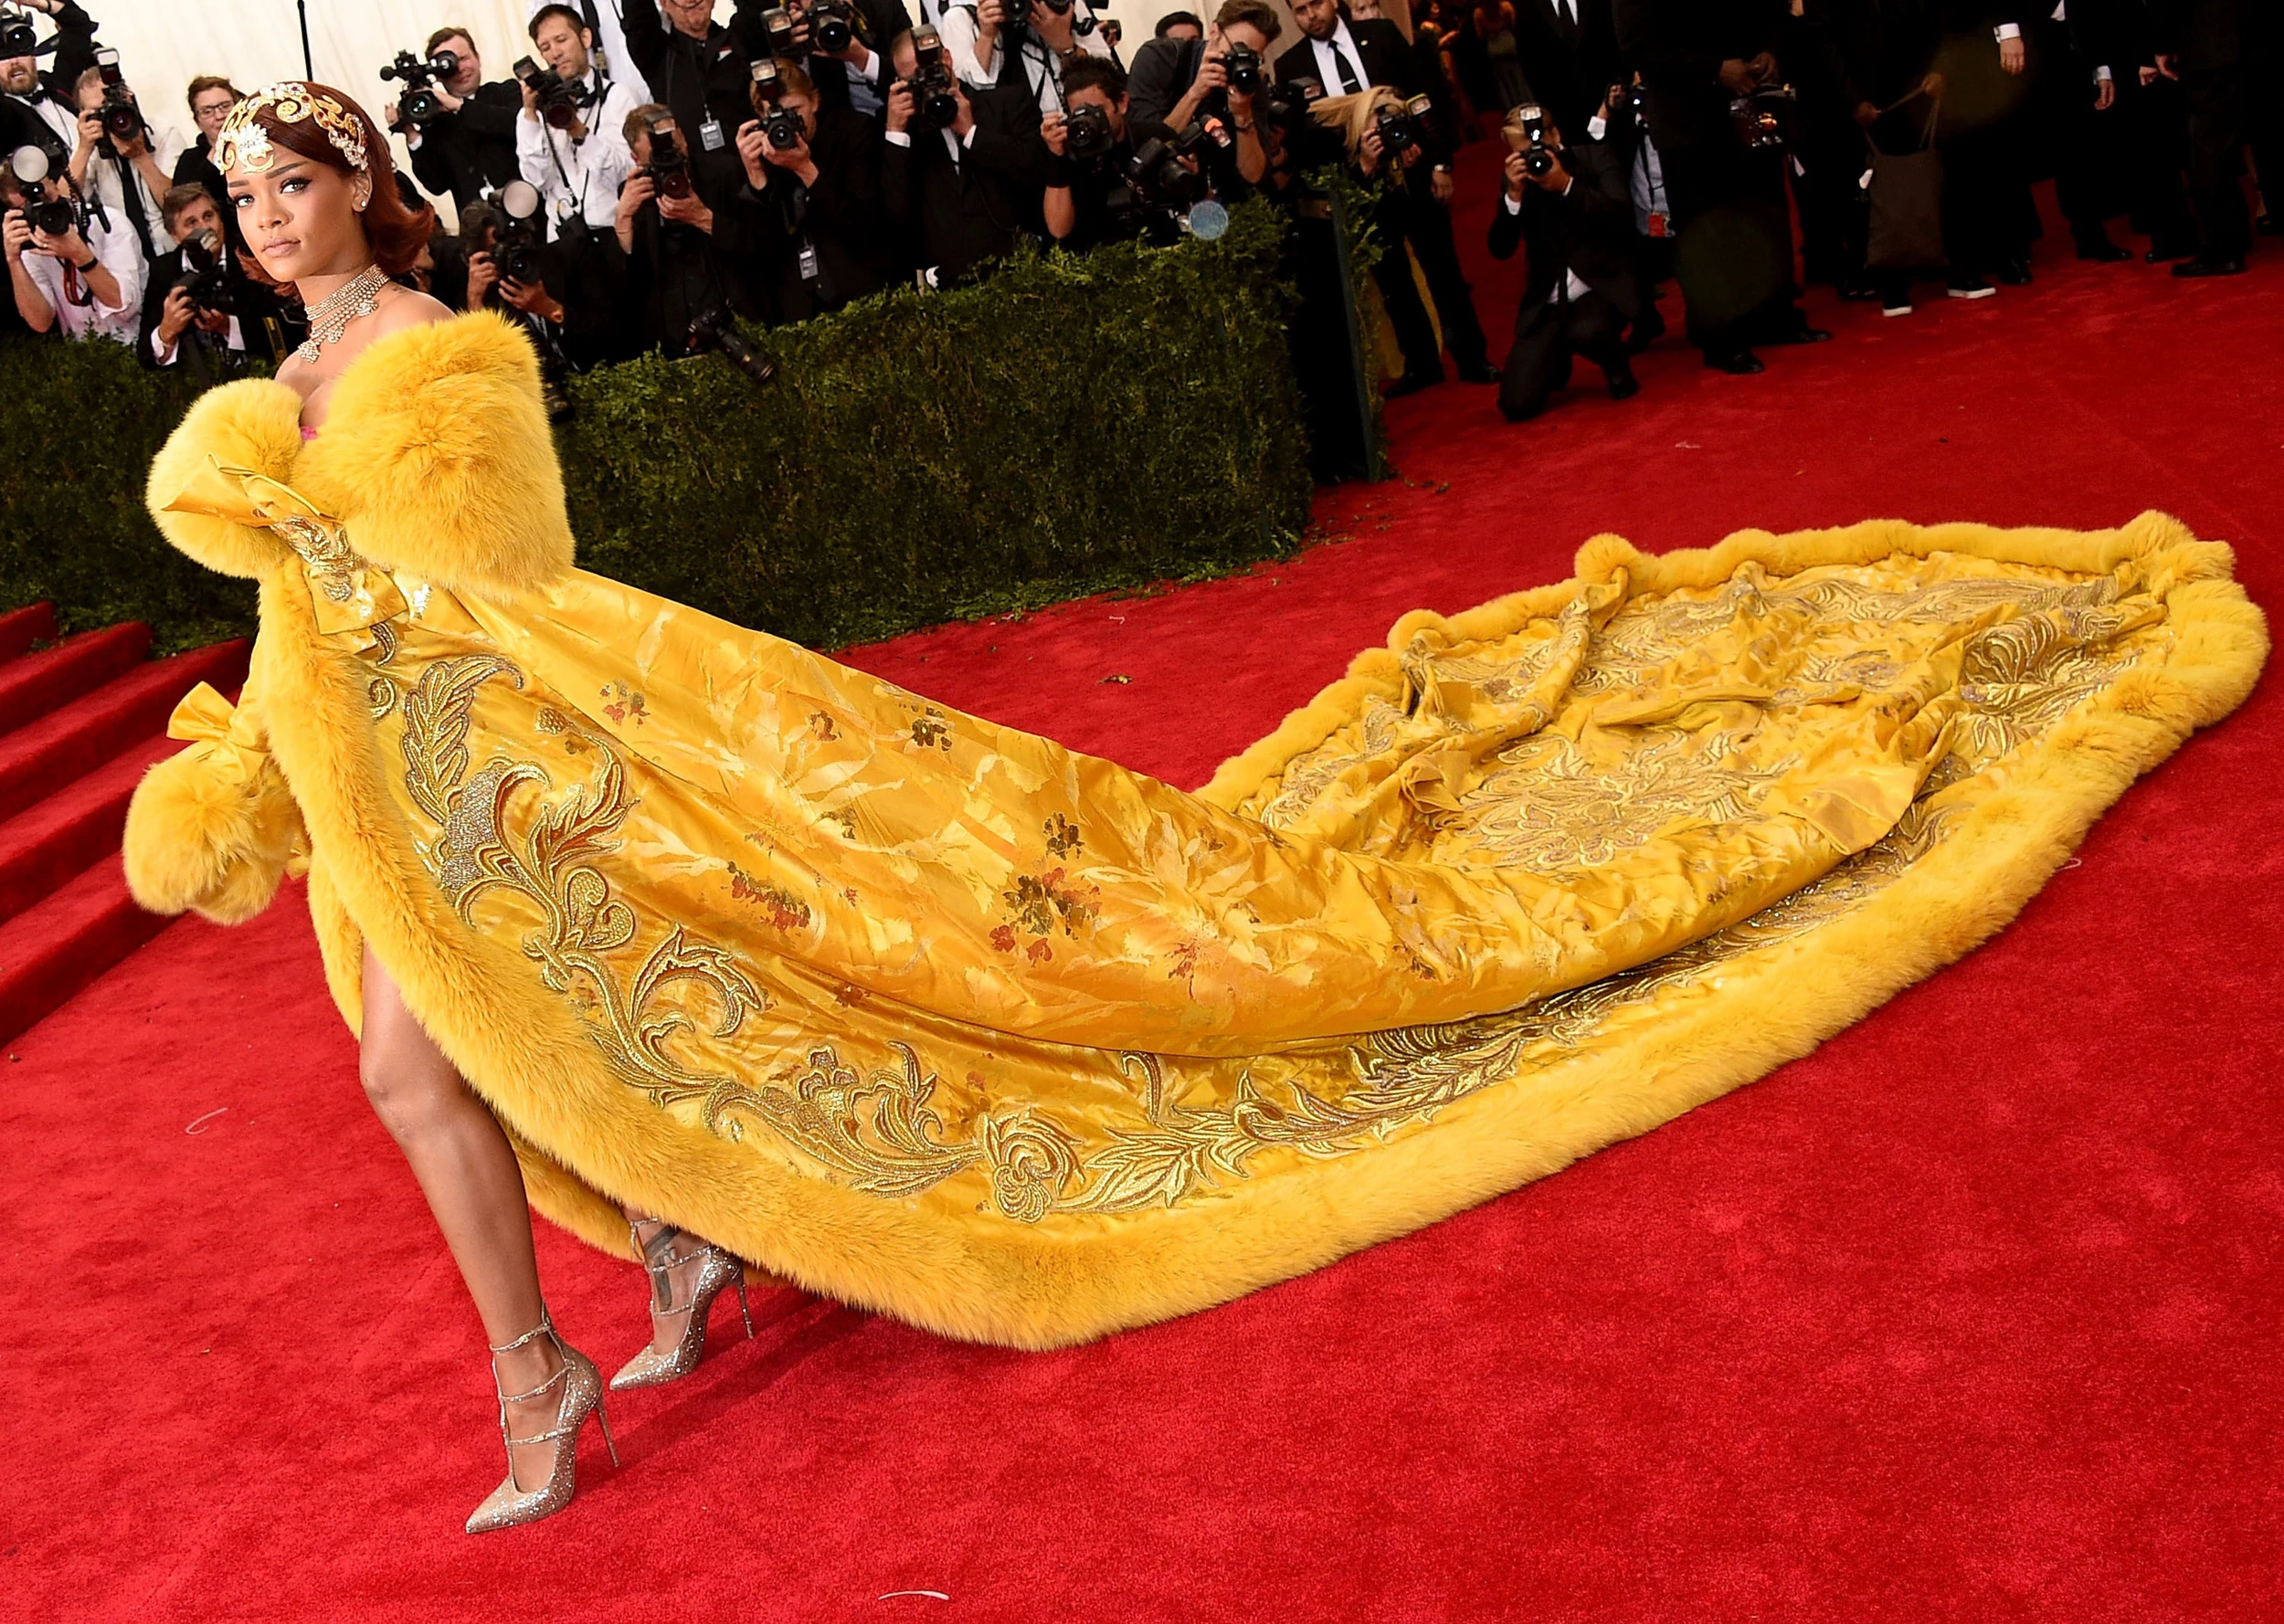 Why Did Rihanna Wear a Pizza to the Met Gala? [PHOTO]